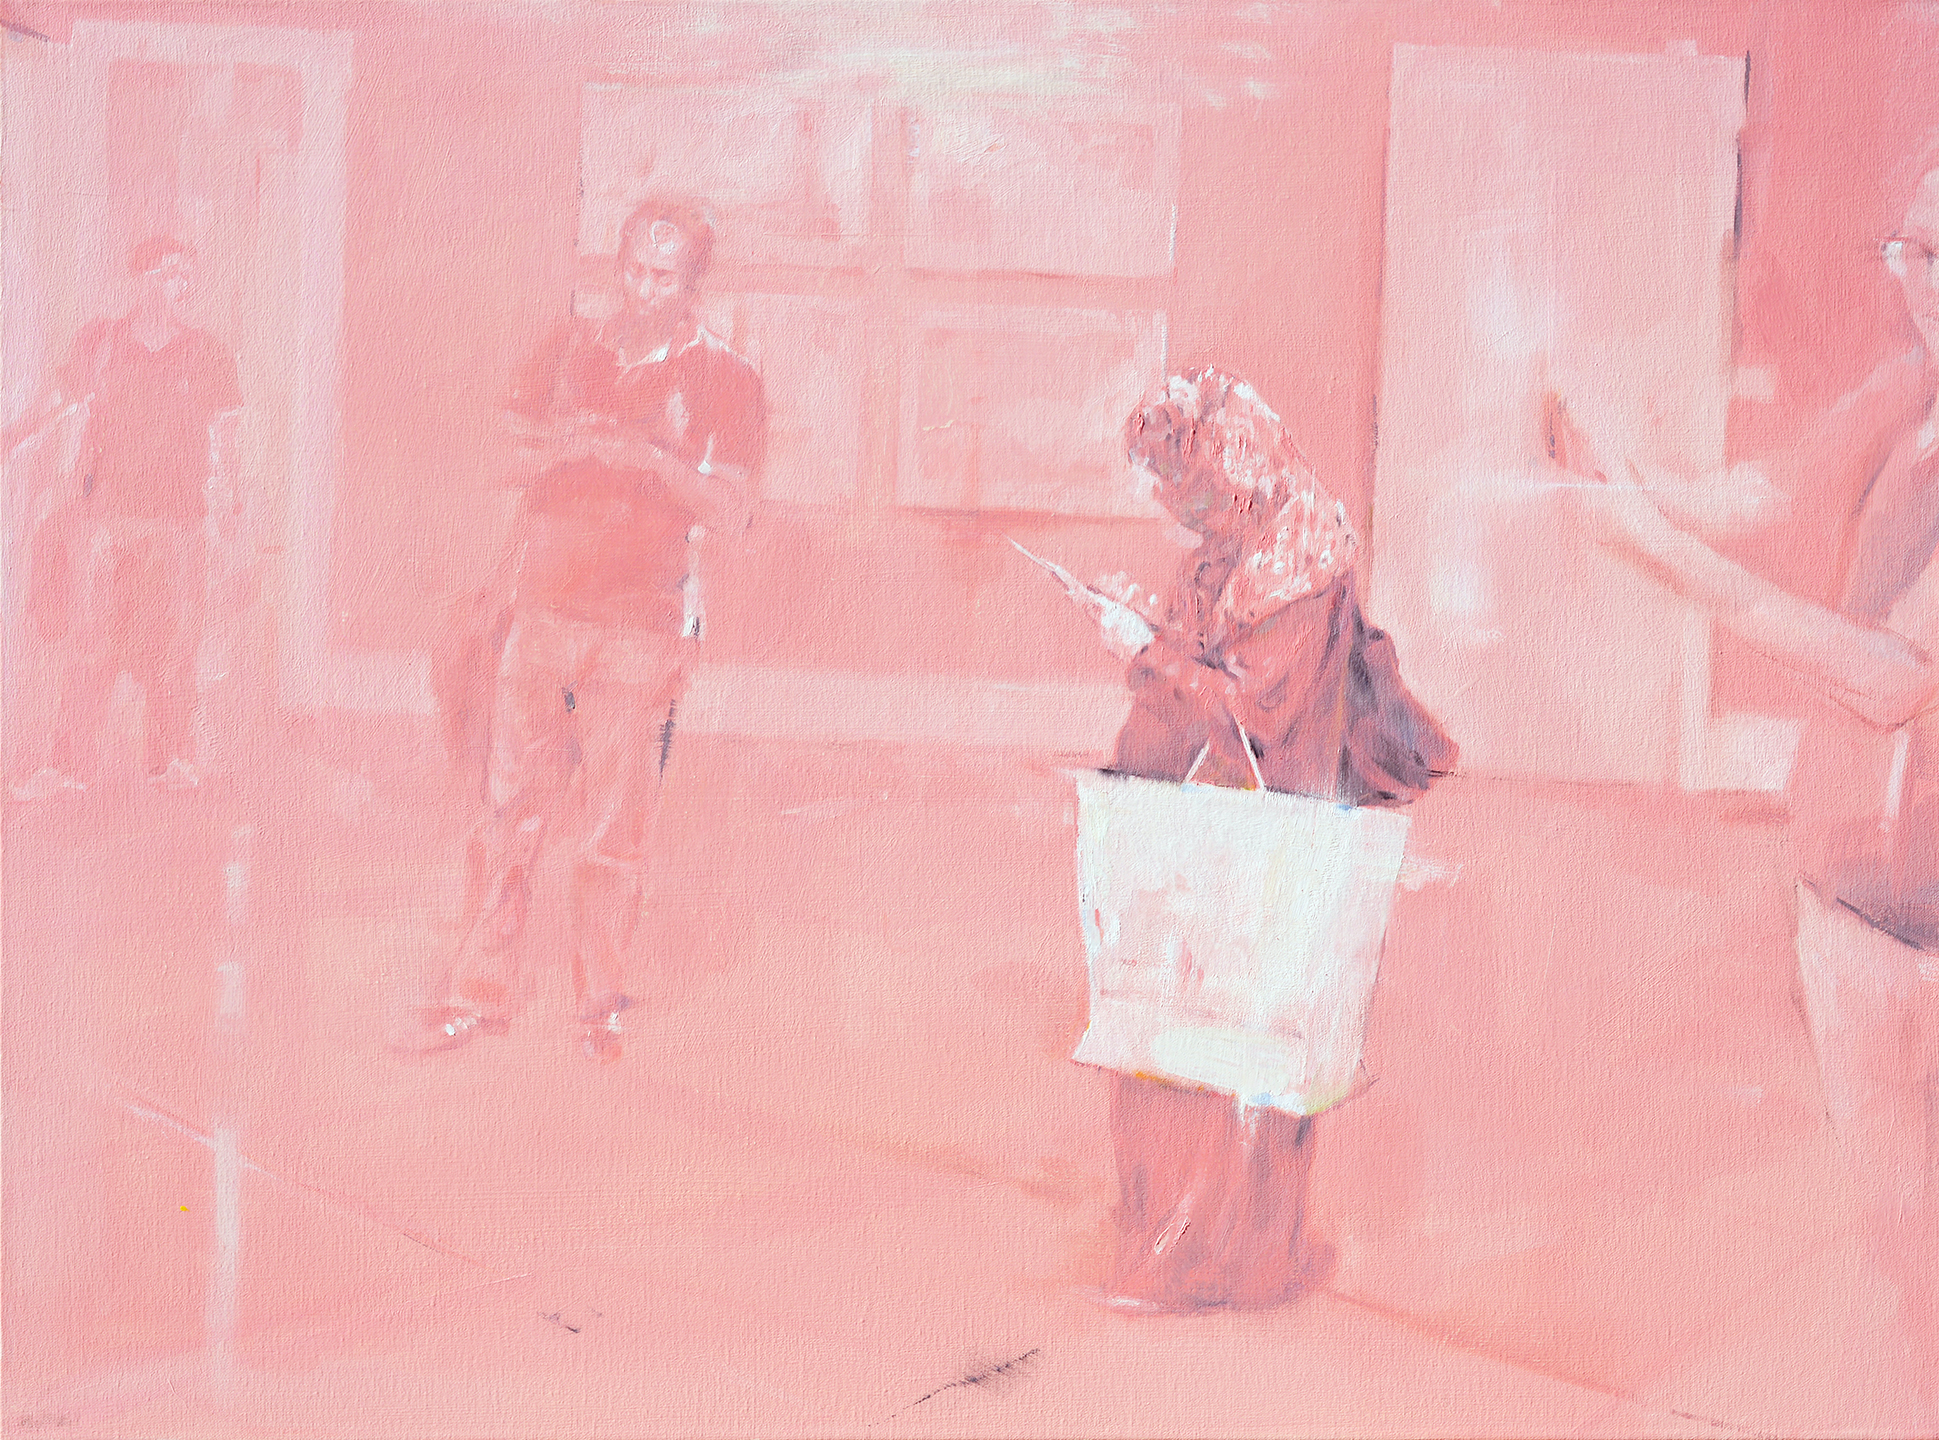 Others, 2014, Oil on canvas, 24x36 inches